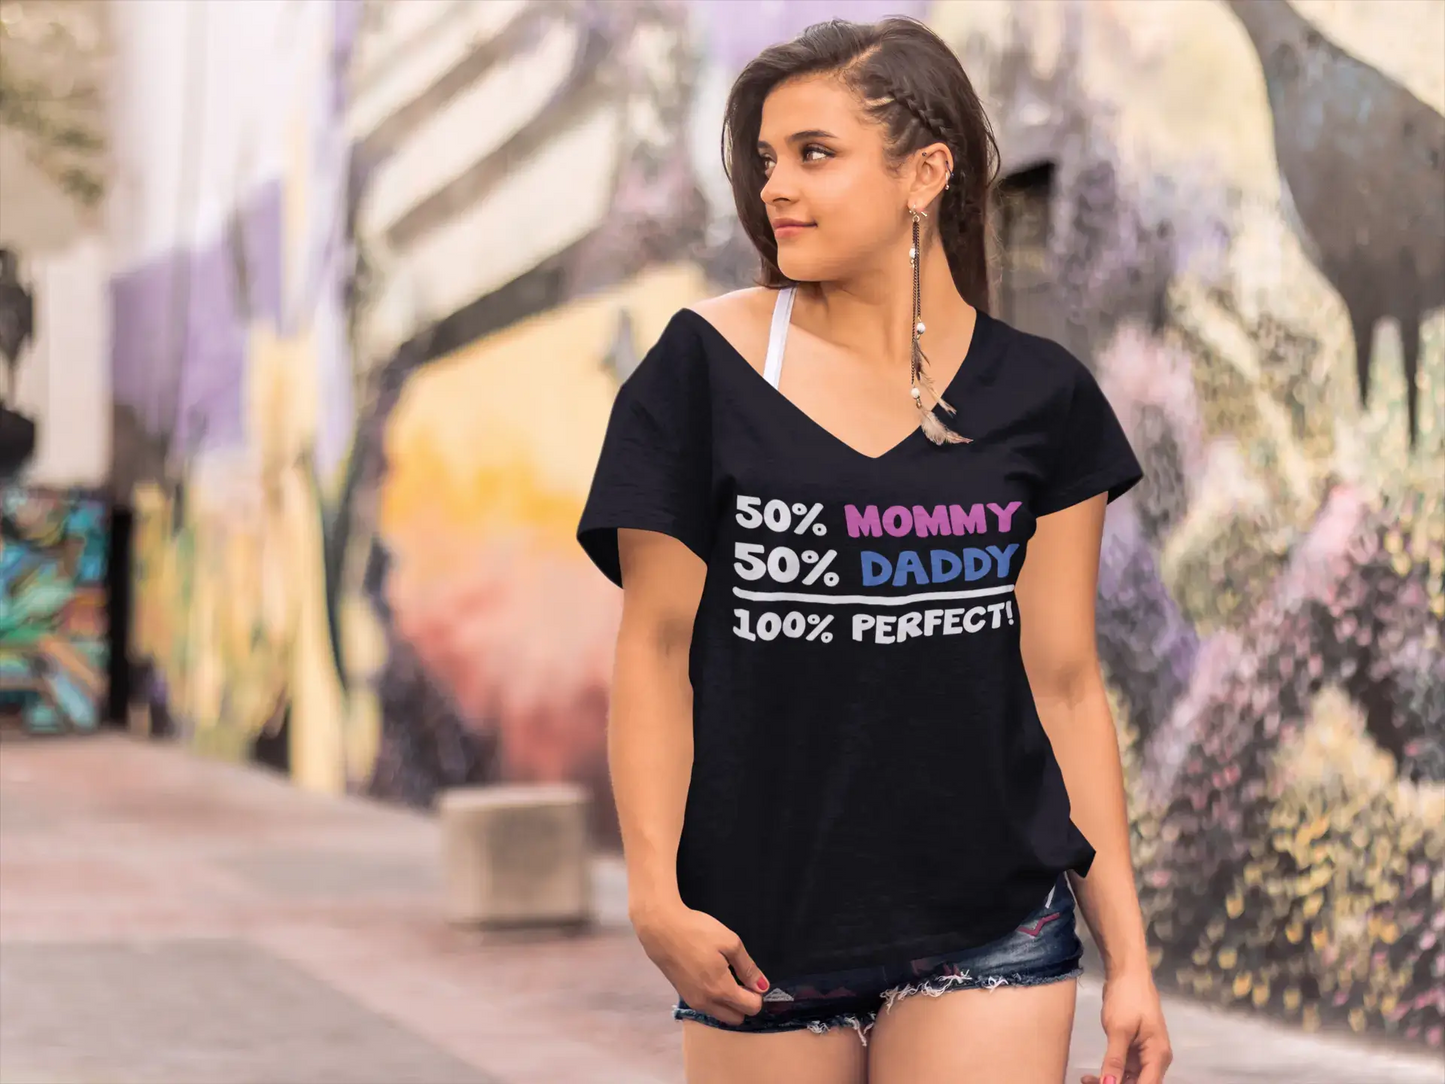 ULTRABASIC Women's T-Shirt 50% Mommy 50% Daddy - Perfect Tee Shirt for Ladies